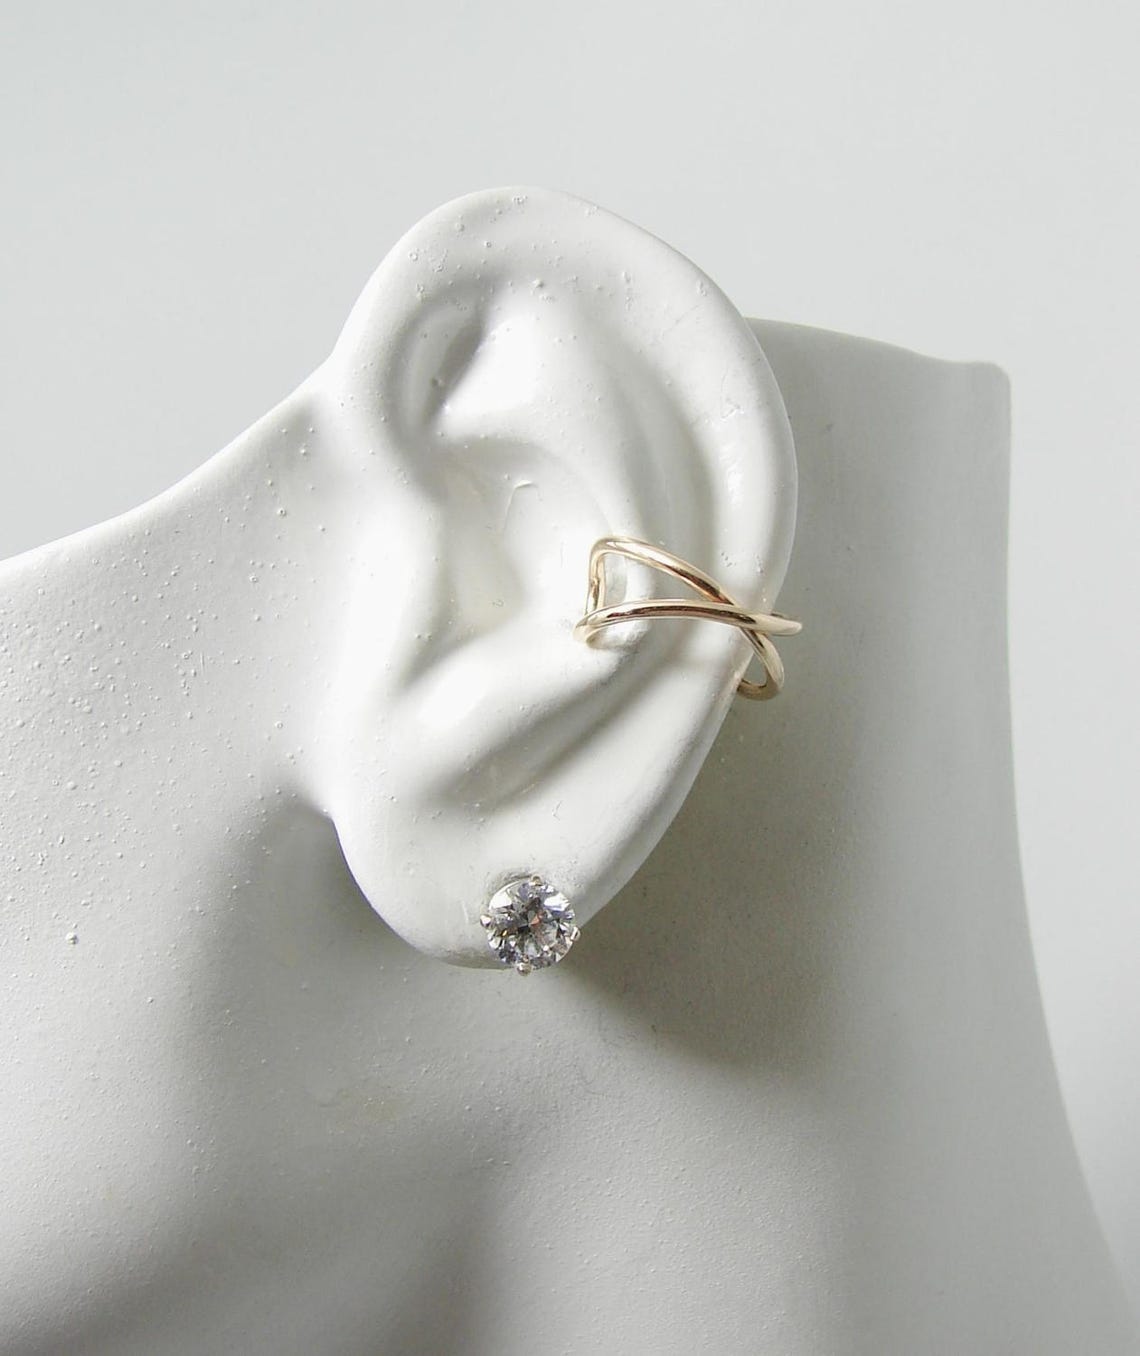 POST Conch Pierced Cartilage Earring Post Solid 14k Gold Gauge - Etsy